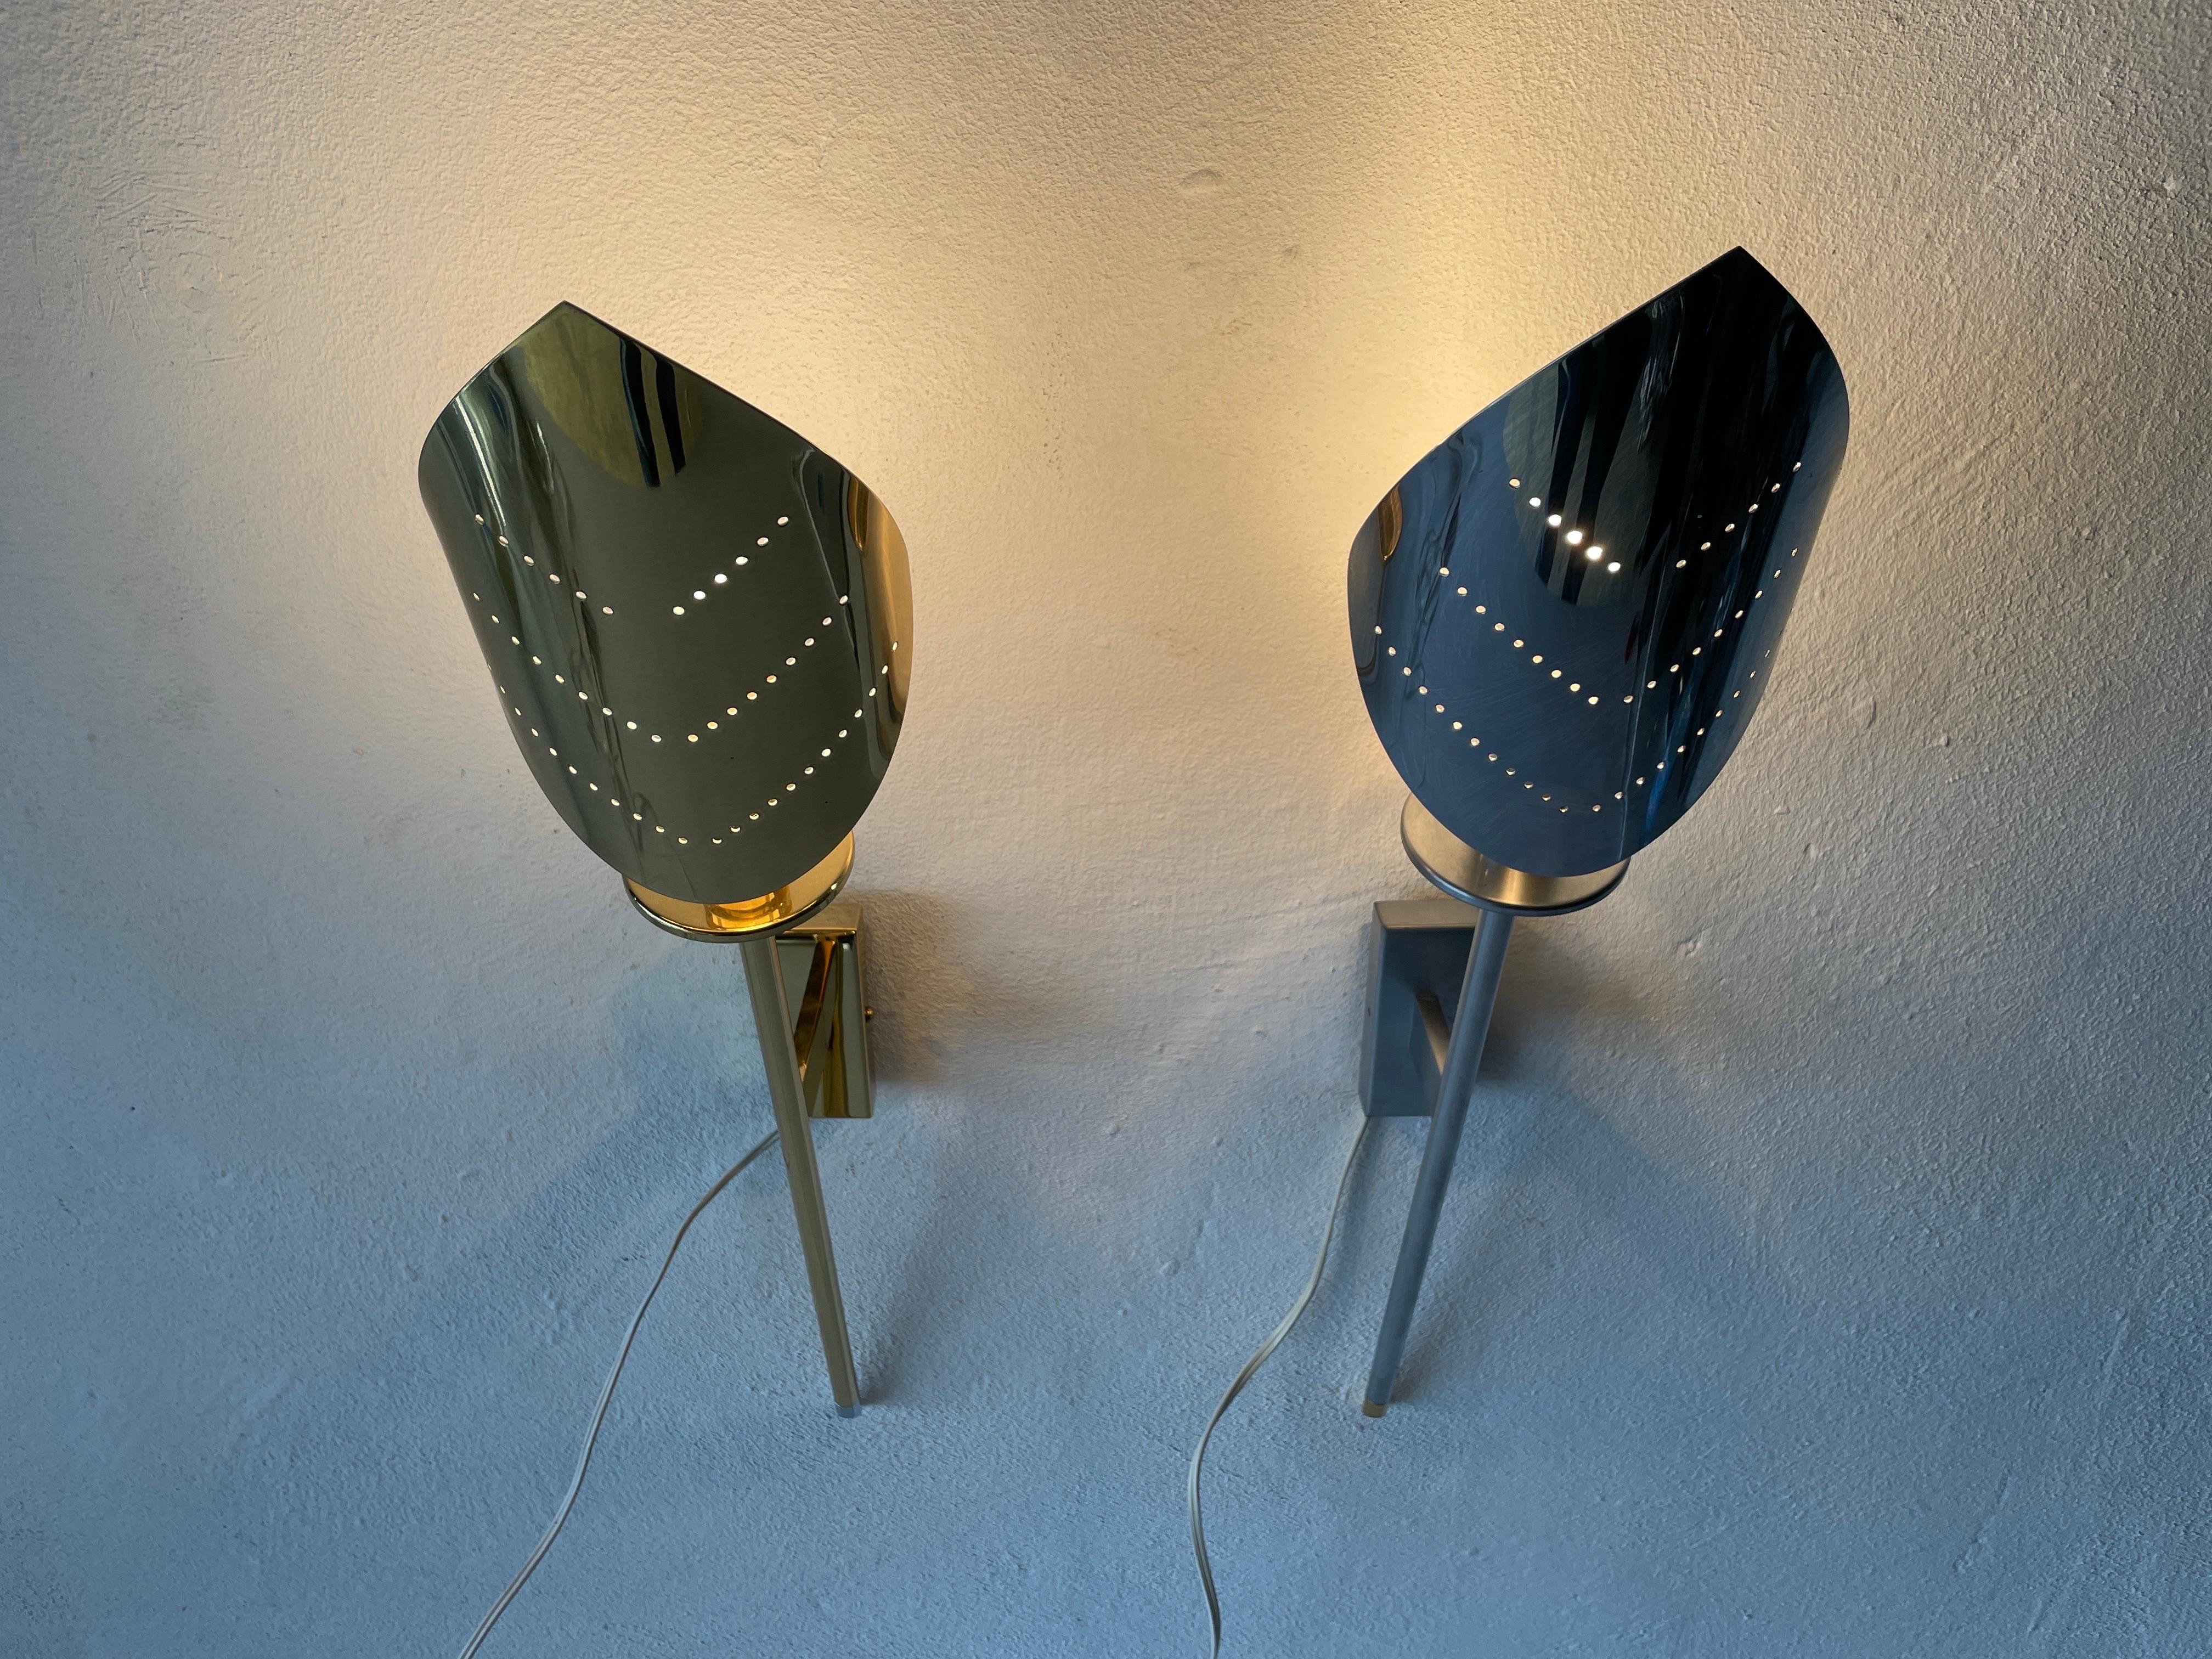 Leaf Shaped Gold and Chrome Pair of Sconces by Baulmann Leuchten, 1980s, Germany For Sale 5